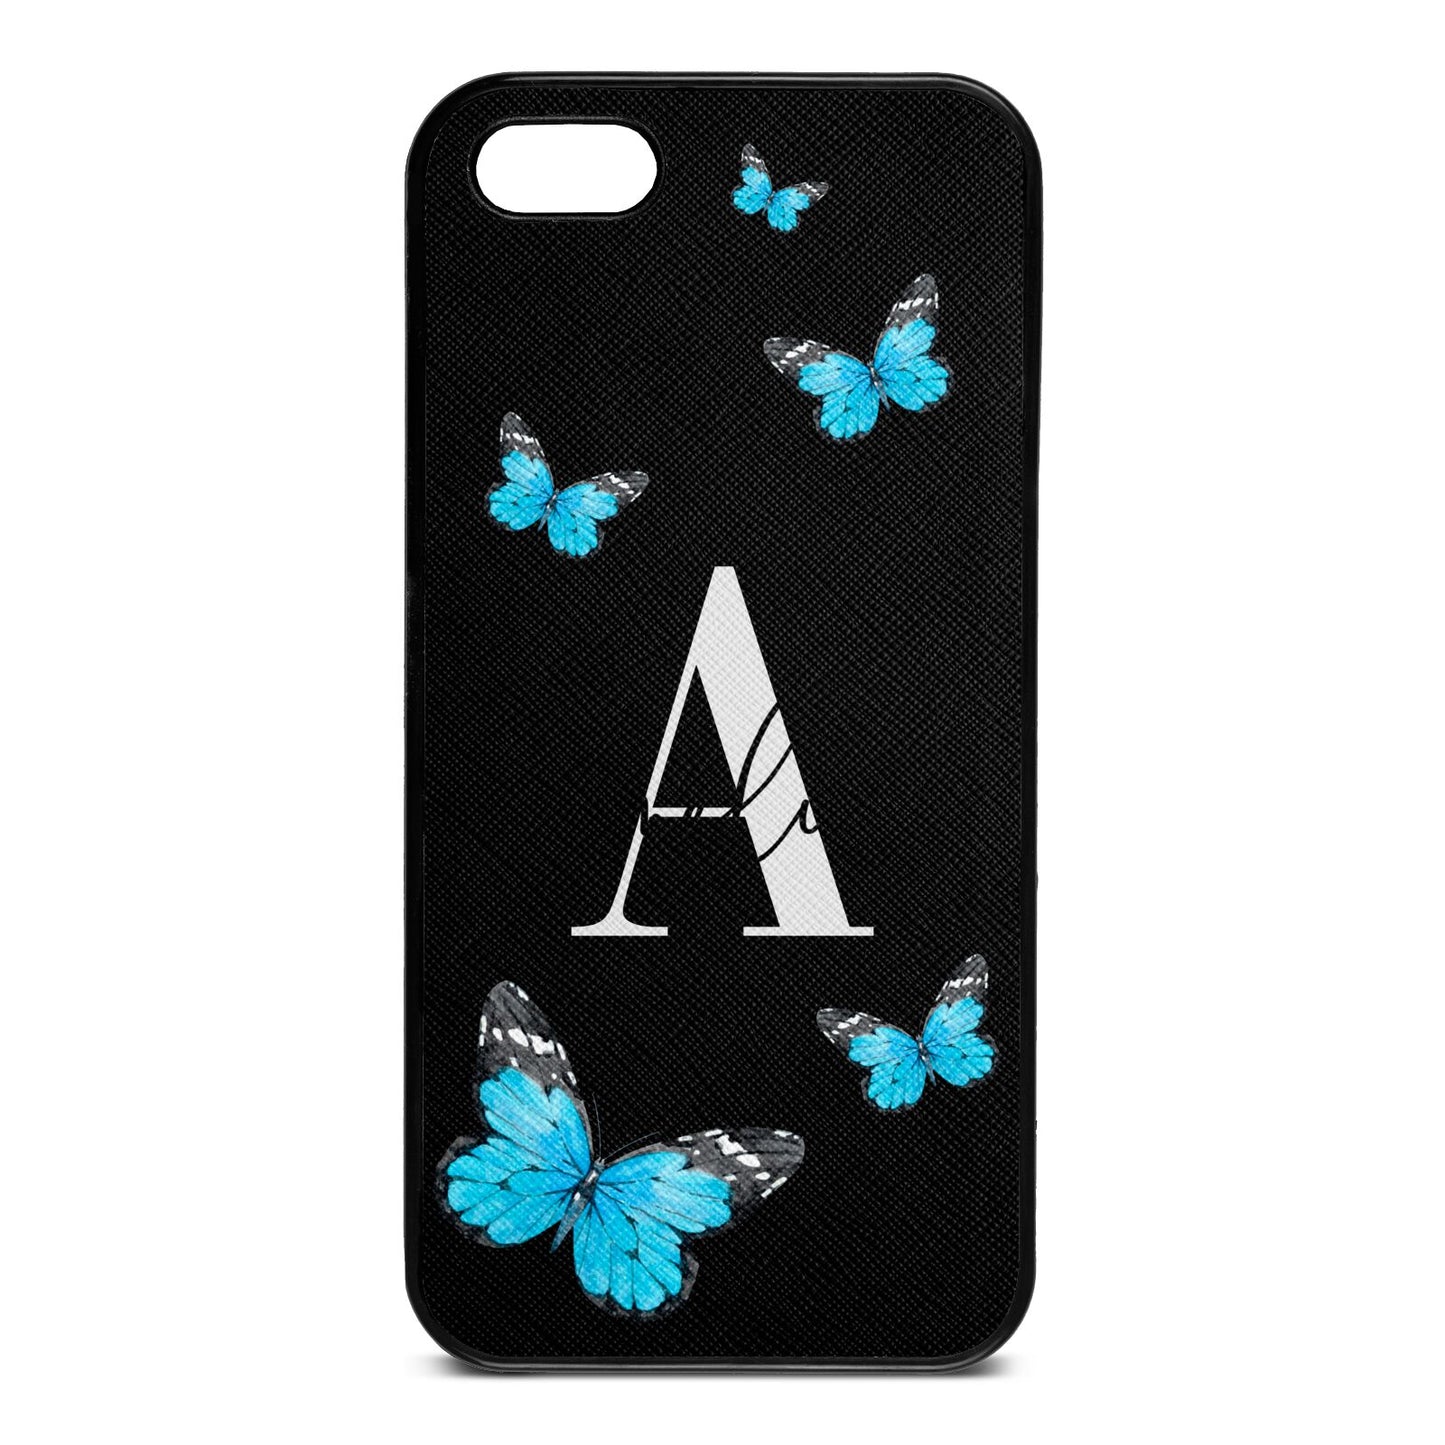 Blue Butterflies with Initial and Name Black Saffiano Leather iPhone 5 Case